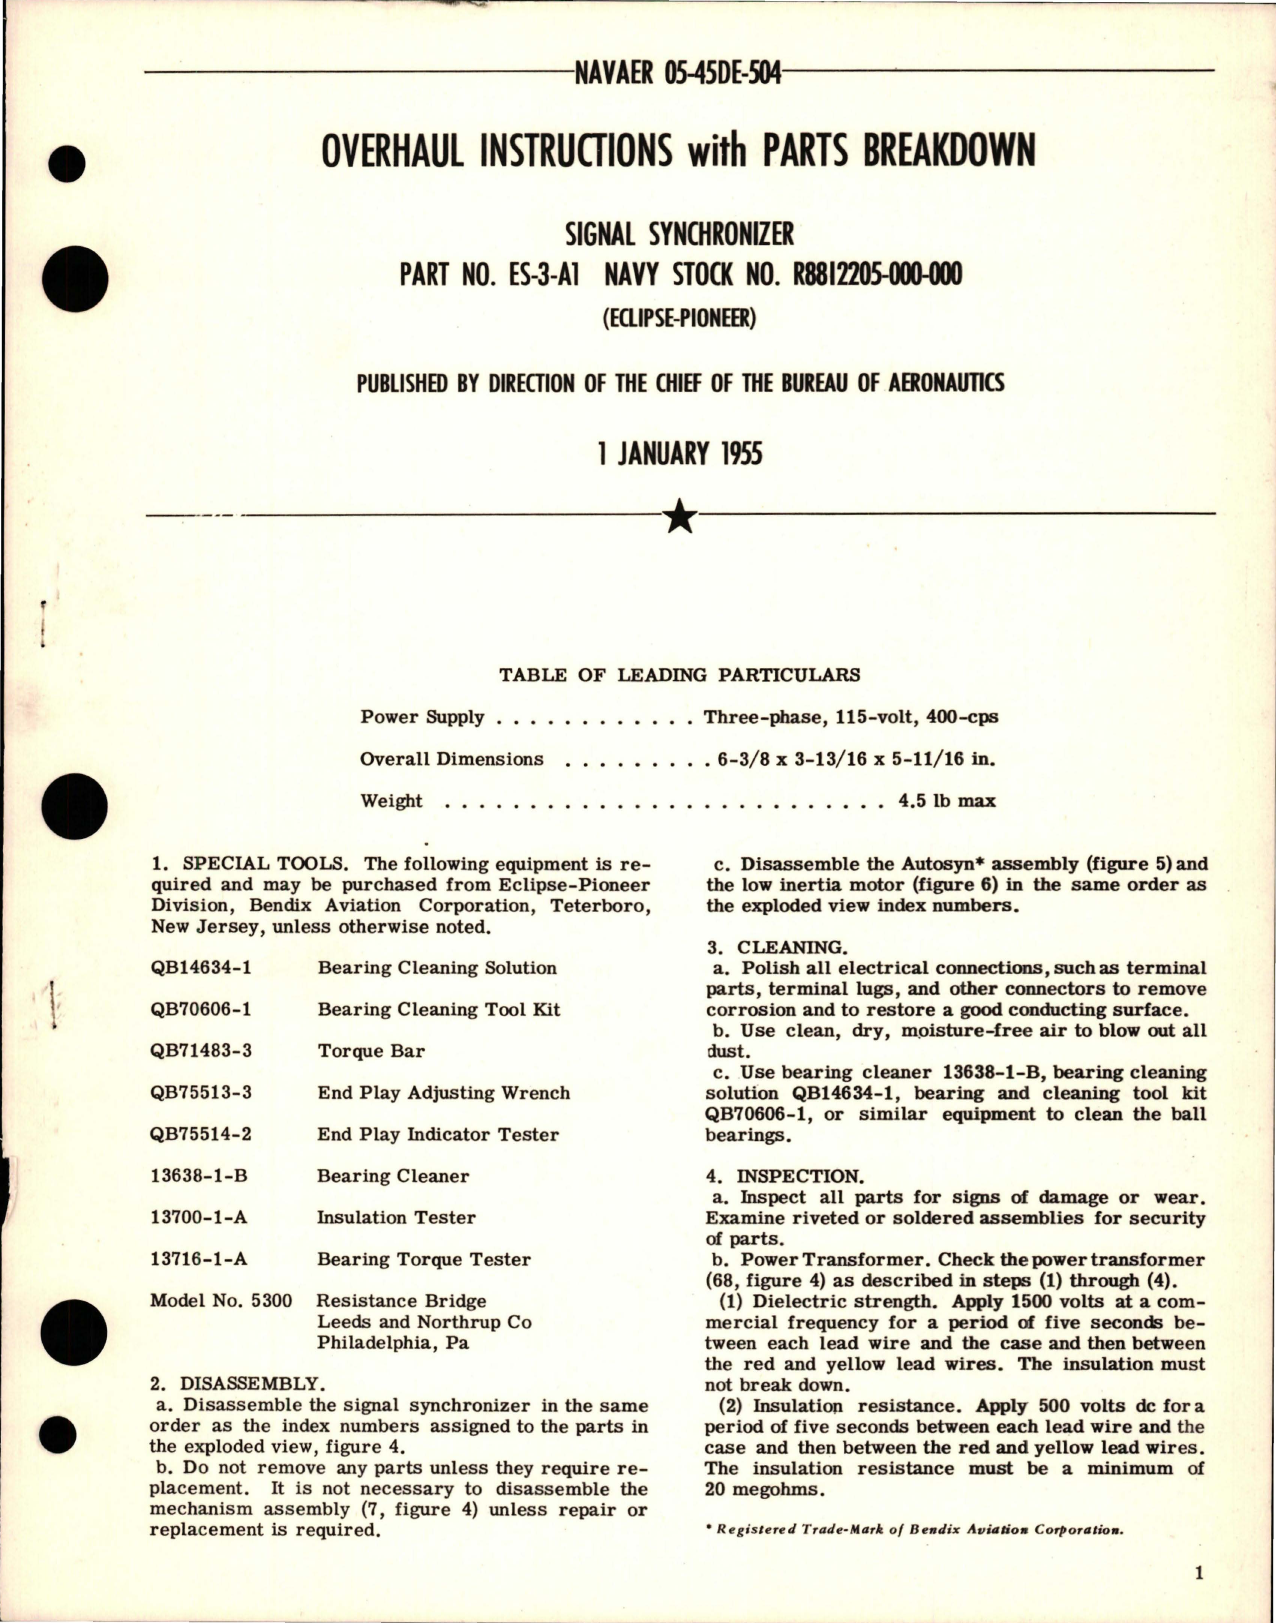 Sample page 1 from AirCorps Library document: Overhaul Instructions with Parts Breakdown for Signal Synchronizer - Part ES-3-A1